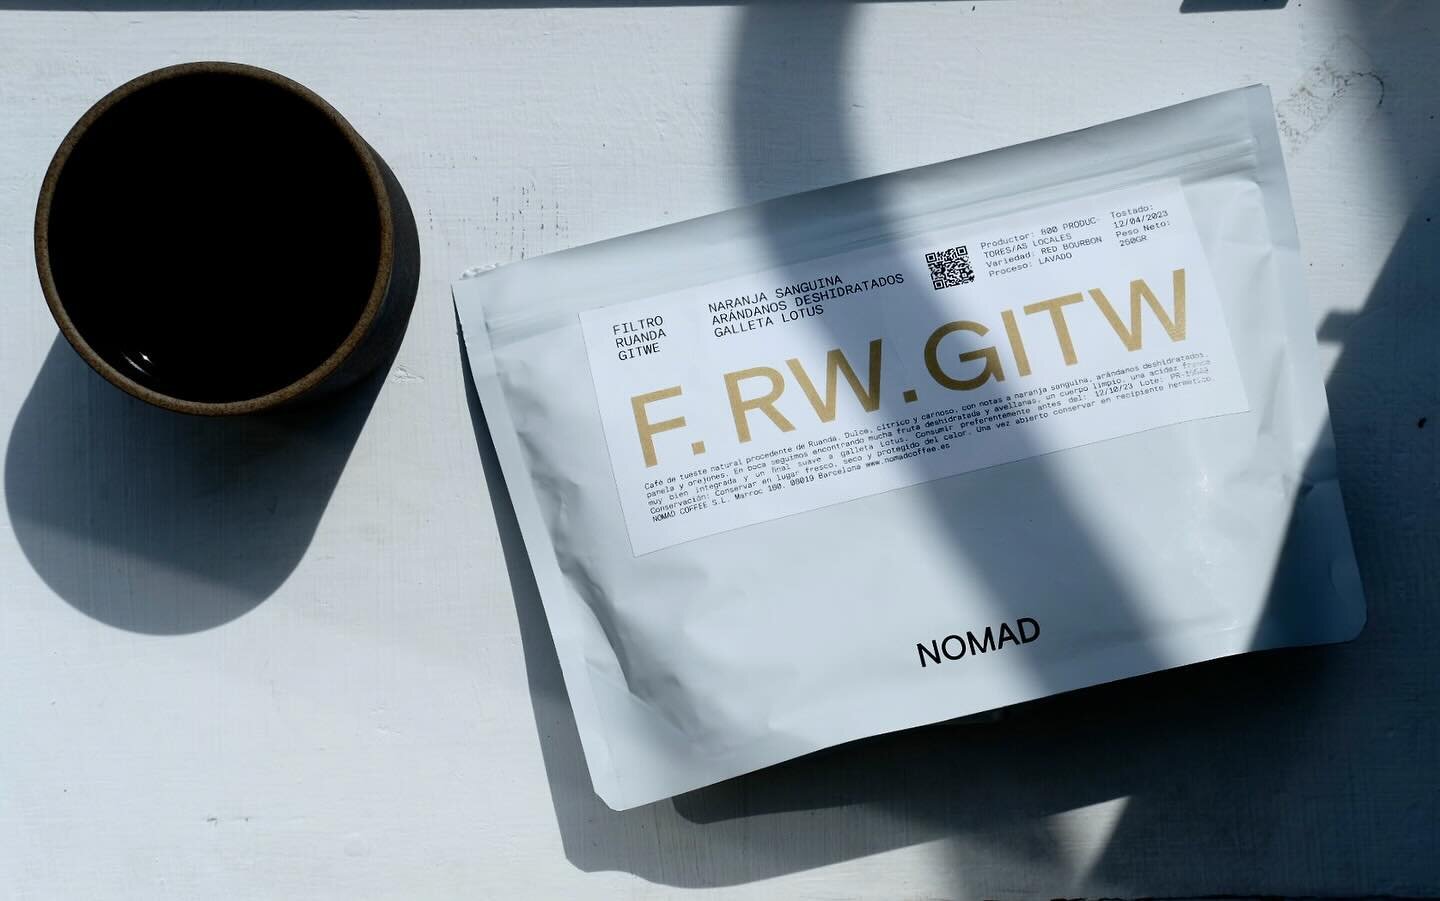 F.RW.GIT.W Ruanda Gitwe :: a seasonal studio favorite from @nomadcoffee out of Barcelona. 

With notes of blueberry, blood orange and biscoff

#nomad #coffee #specialitycoffee #rawanda #pourover